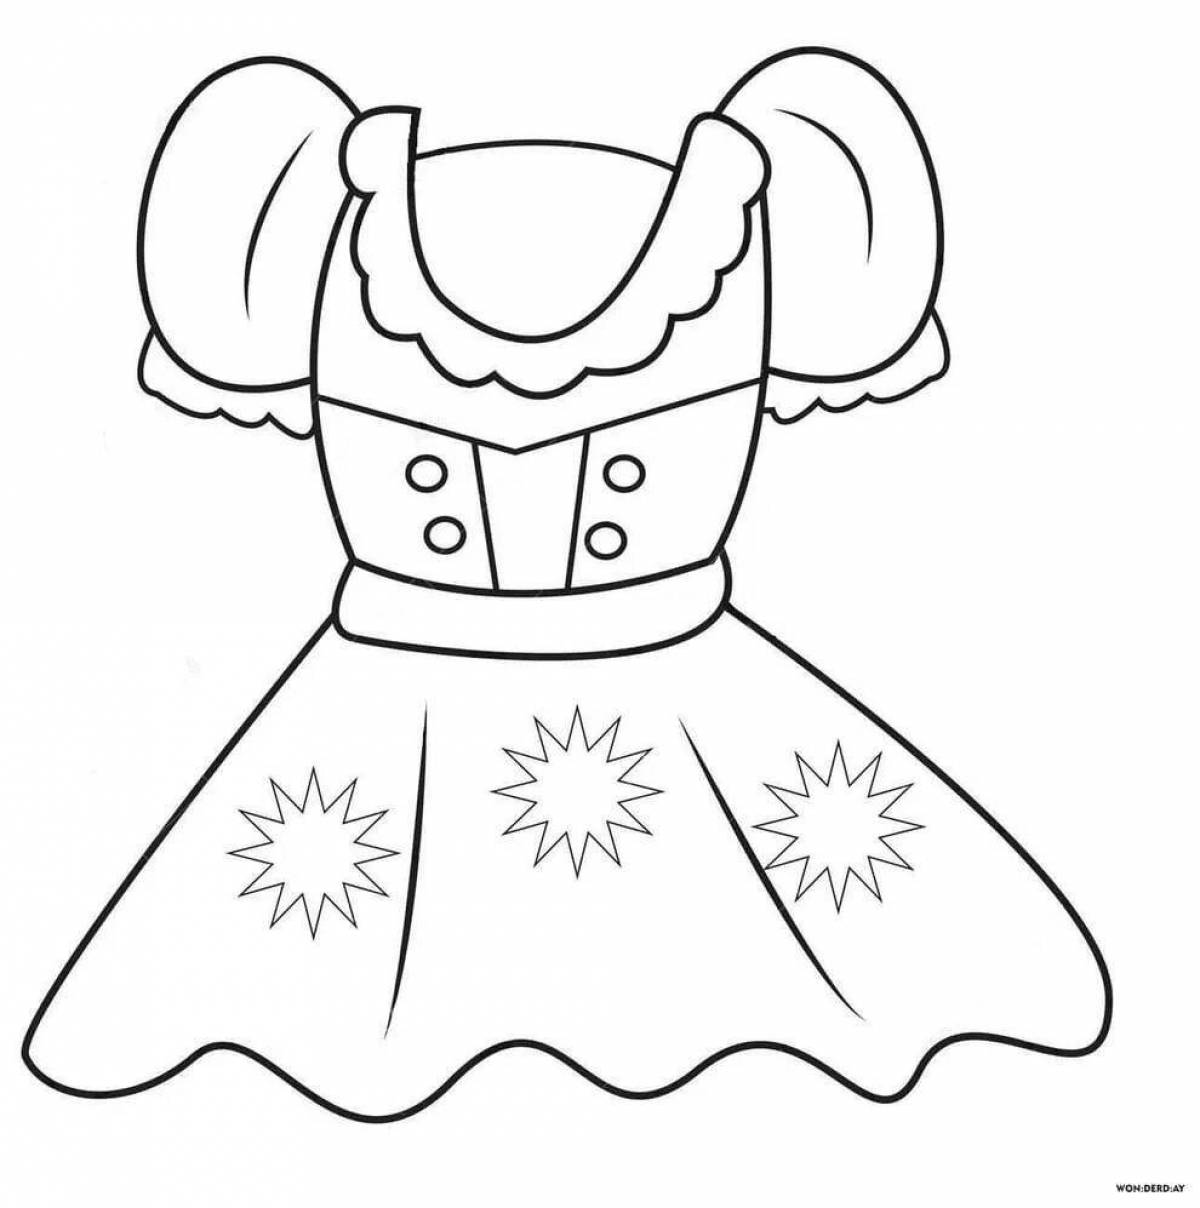 Coloring page delightful dress pattern